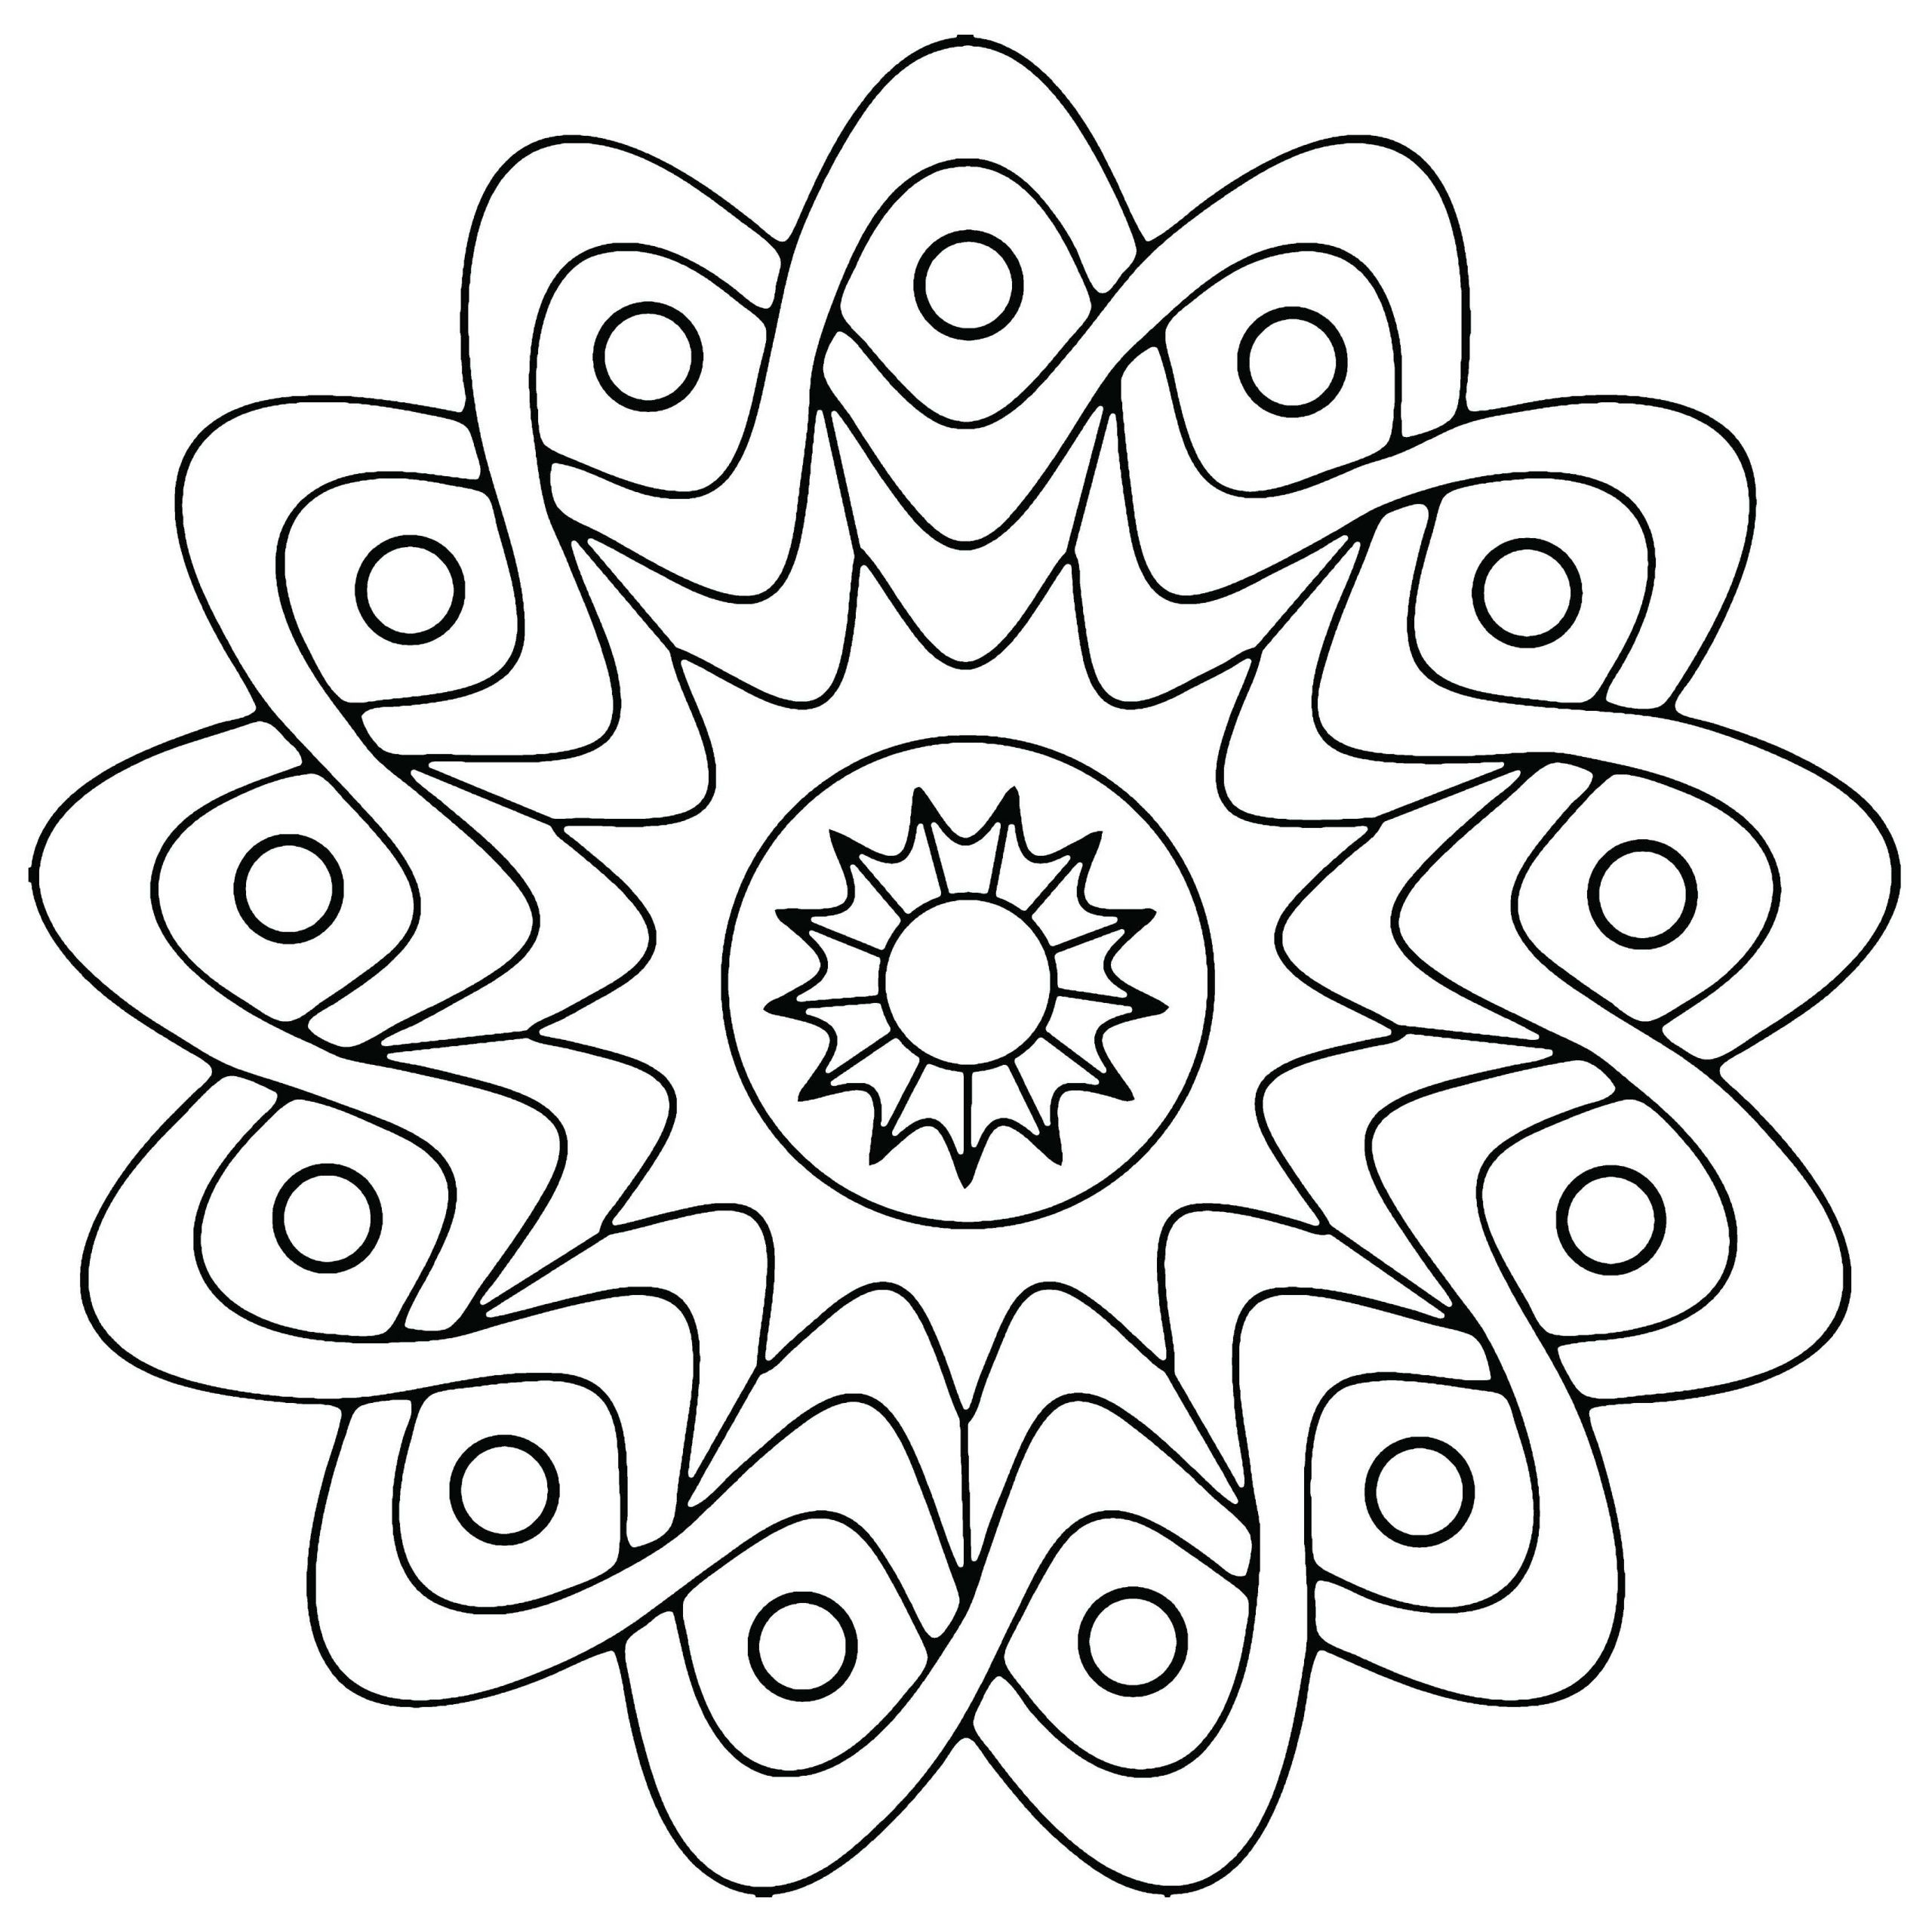 Simple Adult Coloring Books
 Free Printable Geometric Coloring Pages For Kids